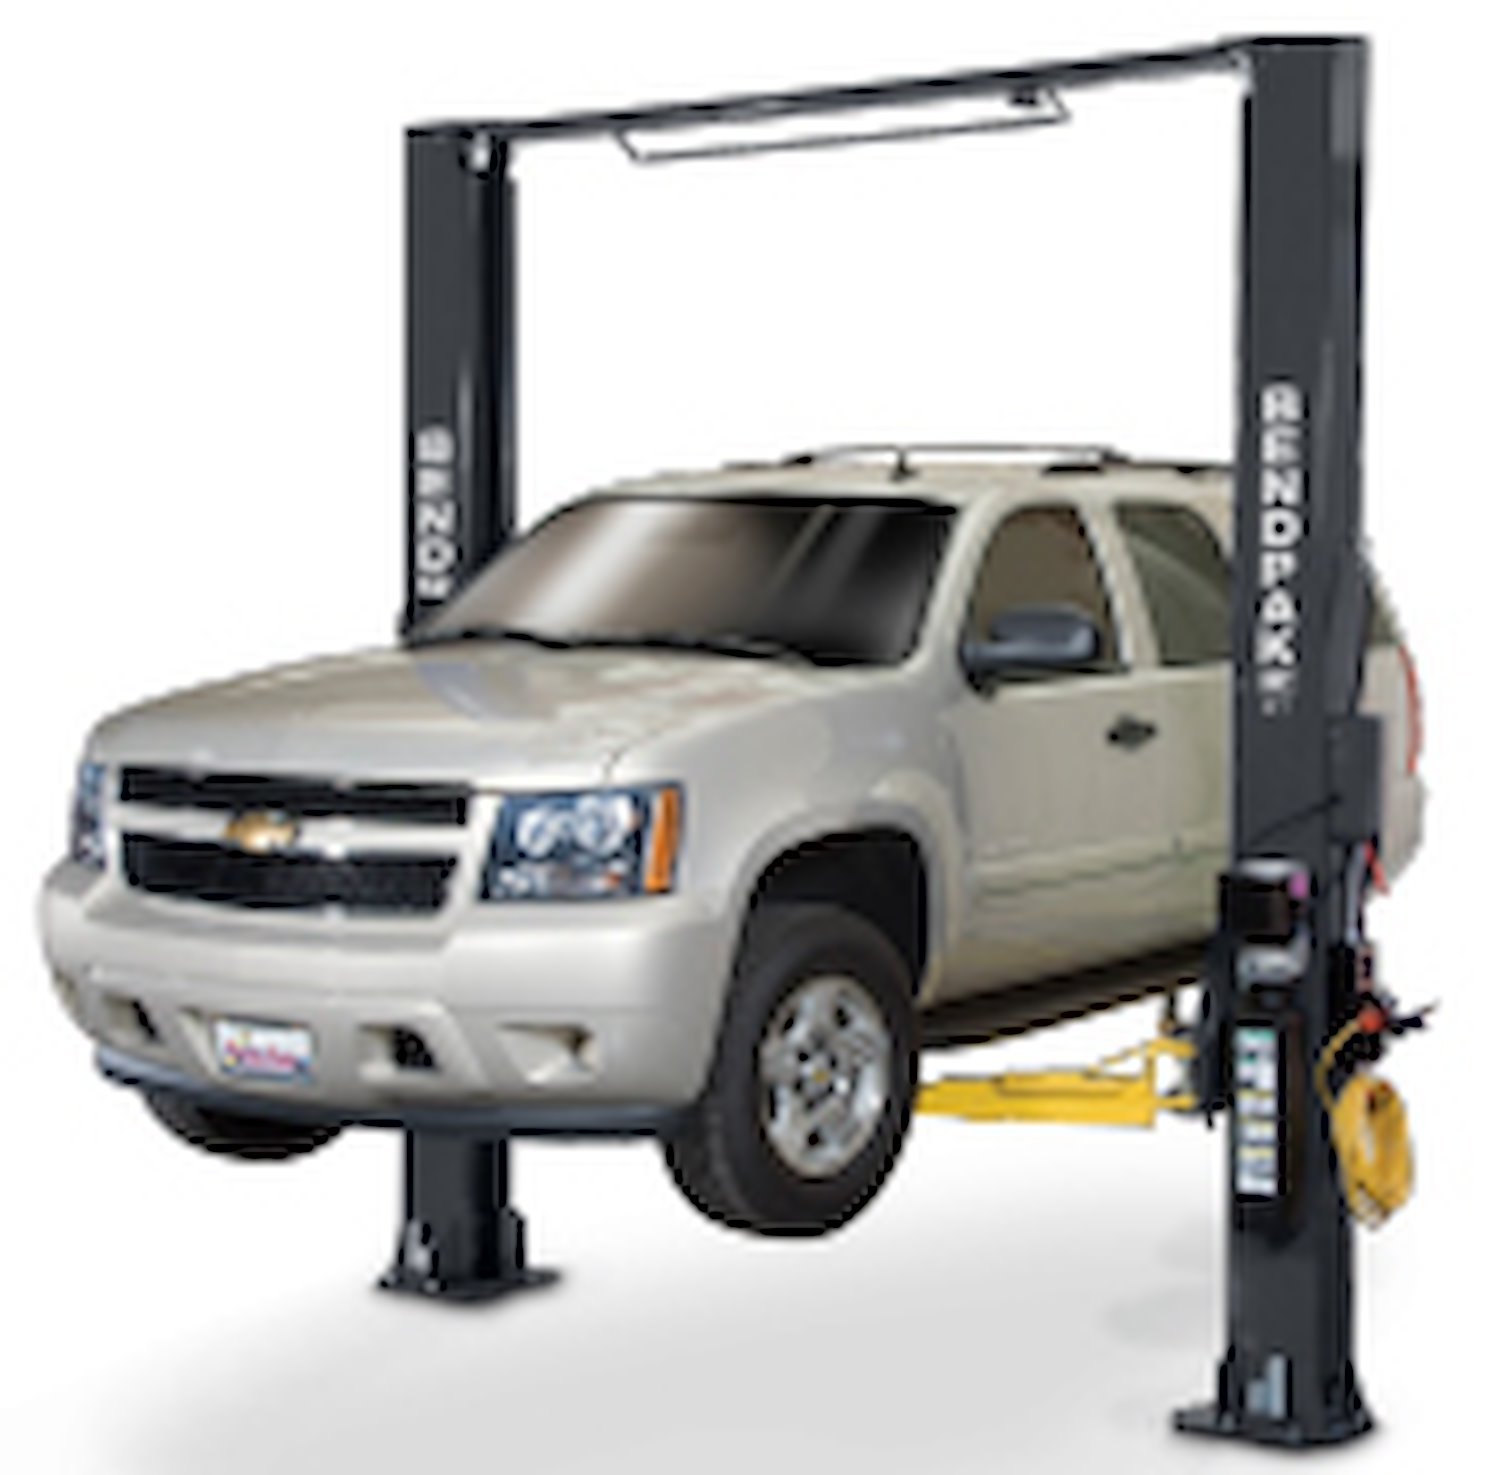 XPR-10S-168 Two-Post Lift, 10,000-lb. Capacity